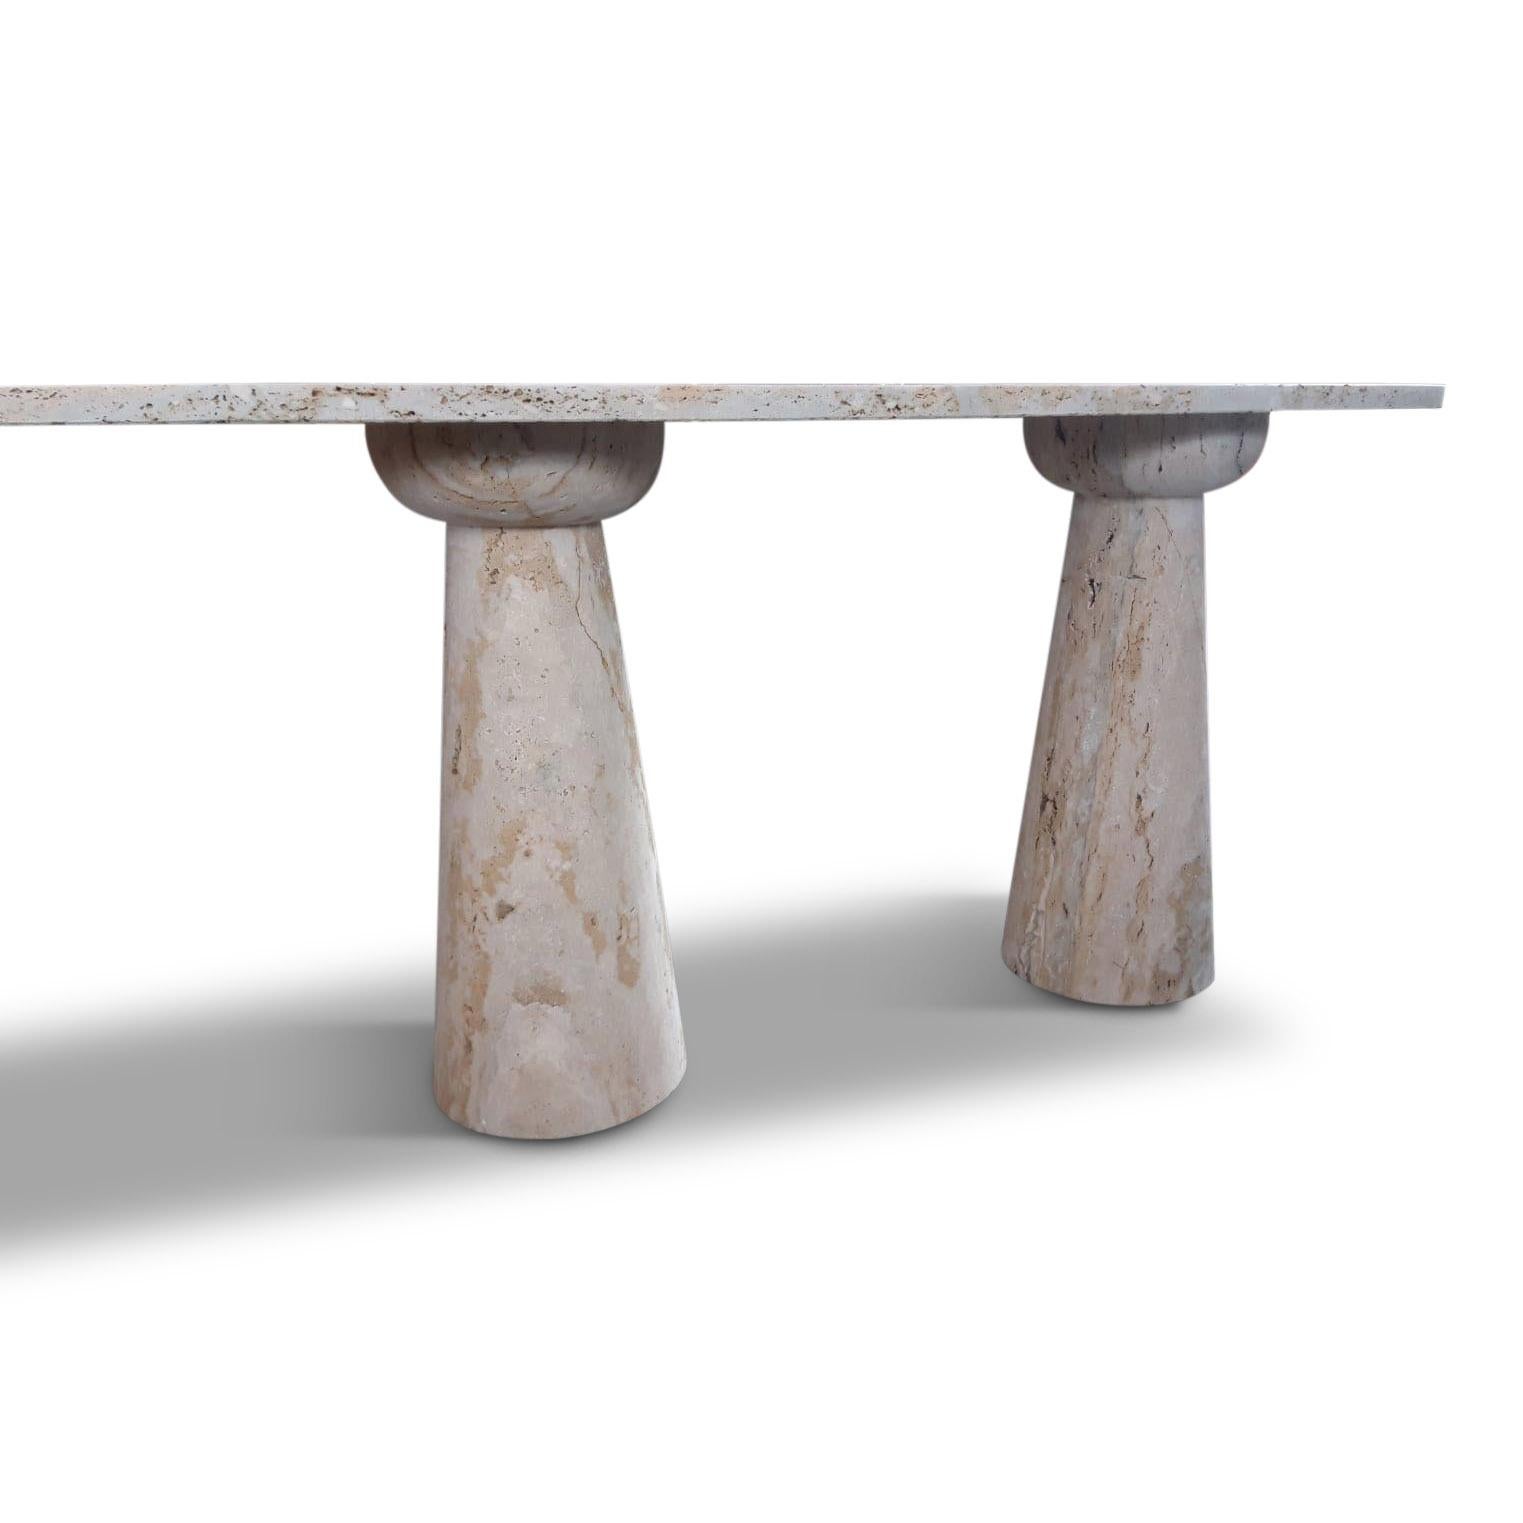 Travertine console table

Made to order in Italy

Two pedestals 

Can be made in a one pedestal version

Contemporary.